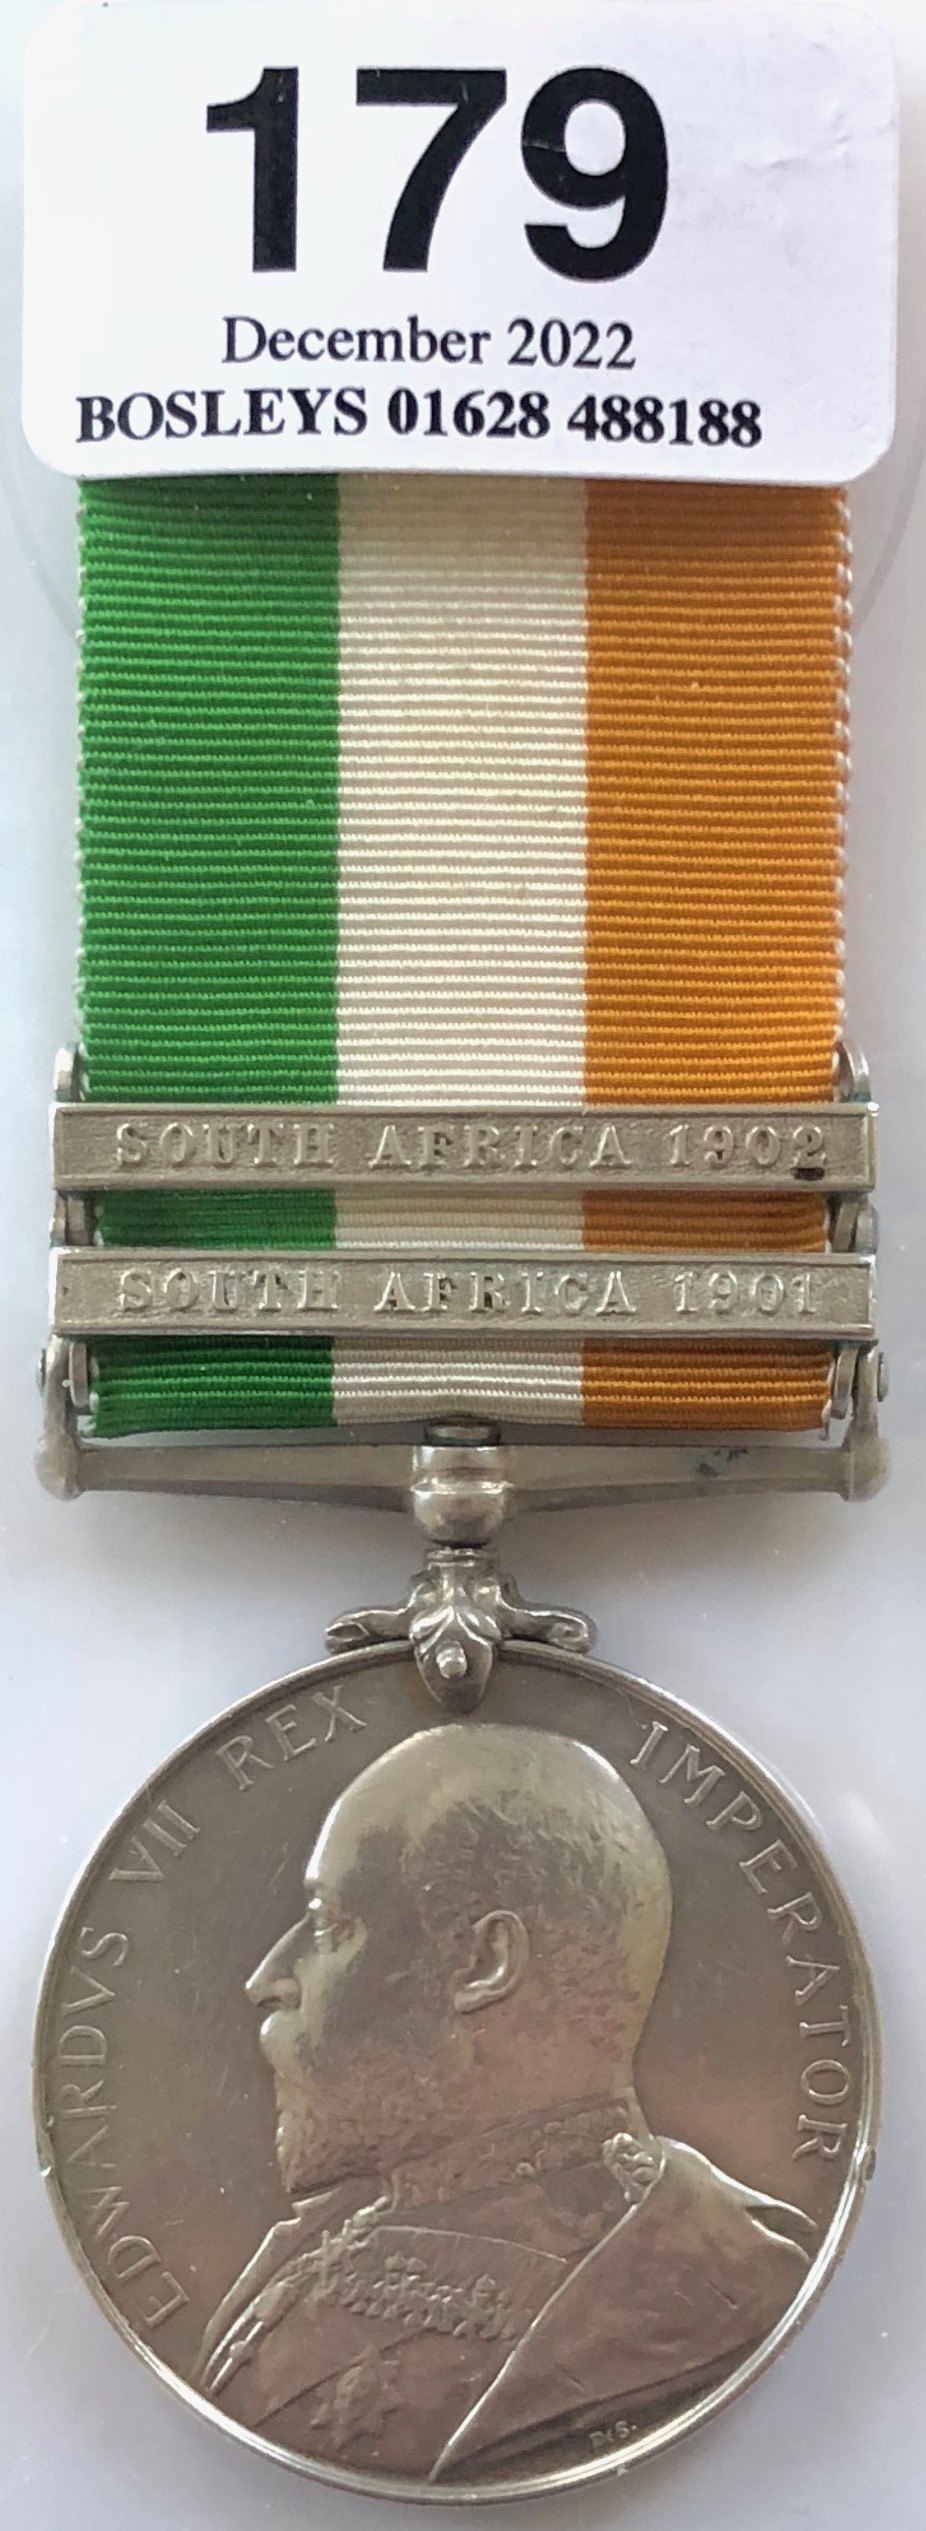 Bedfordshire Regiment Boer War two clasp Kings South Africa Medal. Awarded to 3640 PTE A. LIVINGS